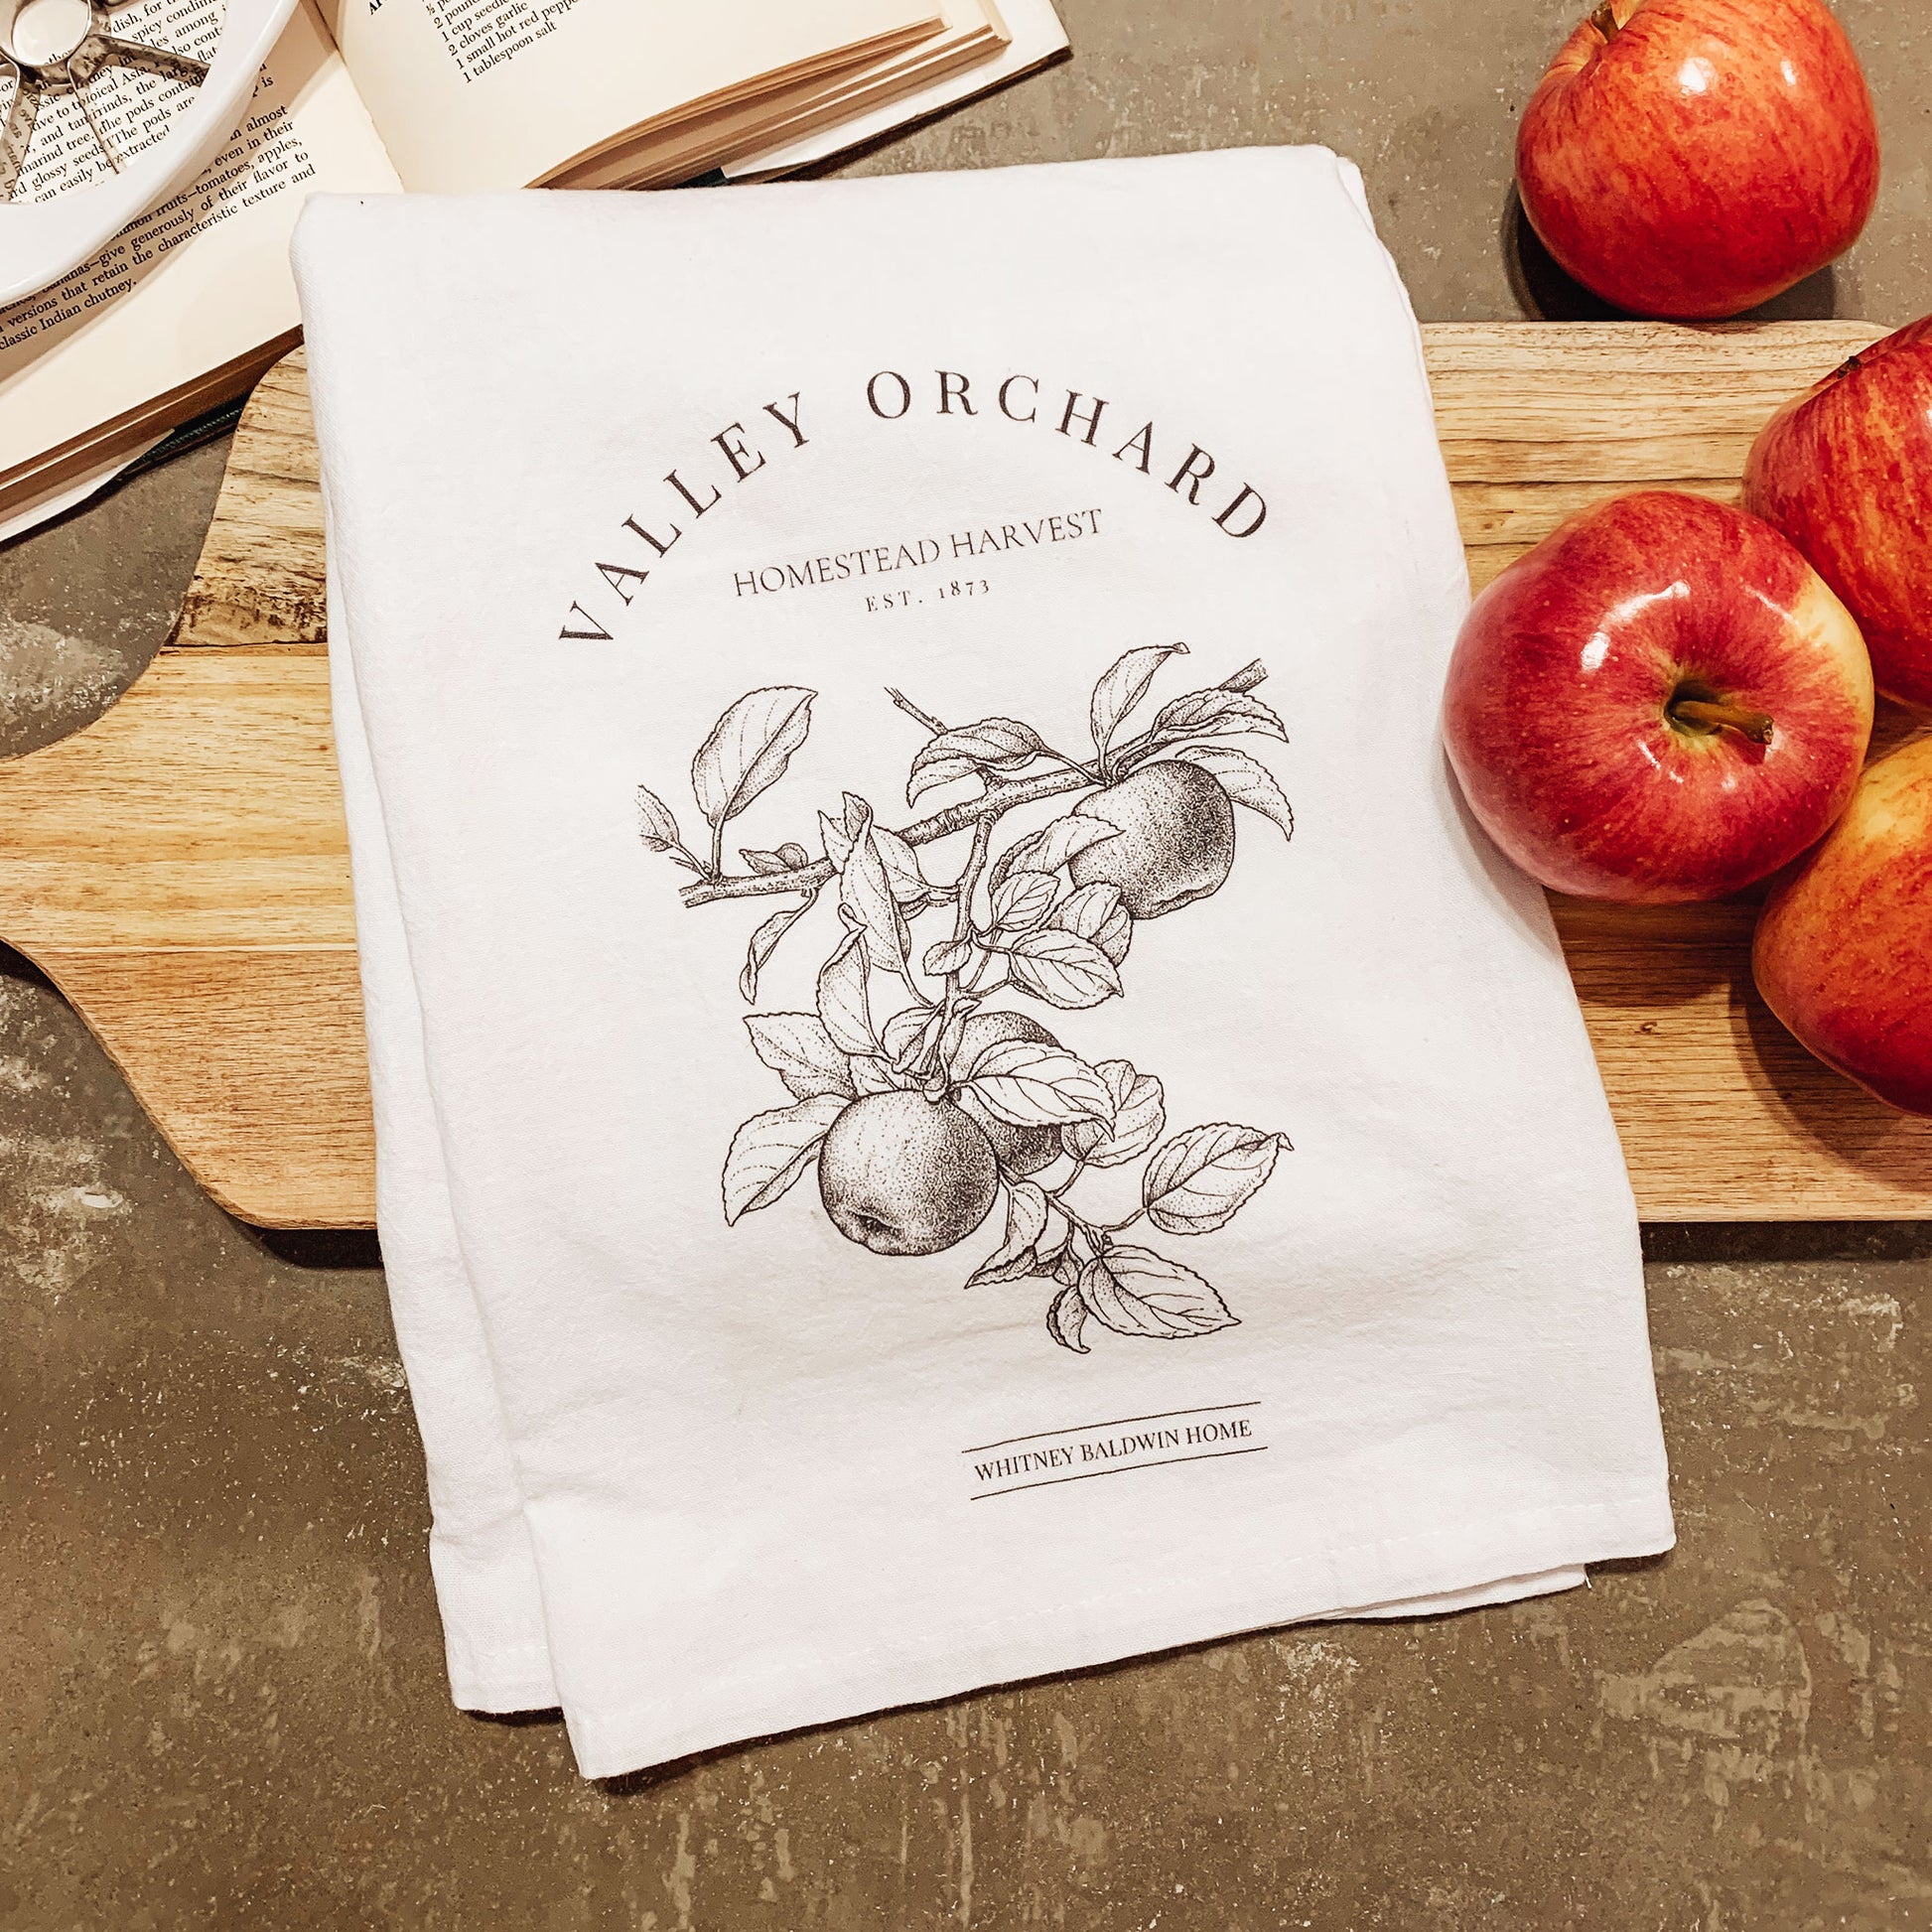 homestead harvest valley orchard apple orchard tea towel. Tea towel displayed with cutting board, apples, cook book and apple slicer